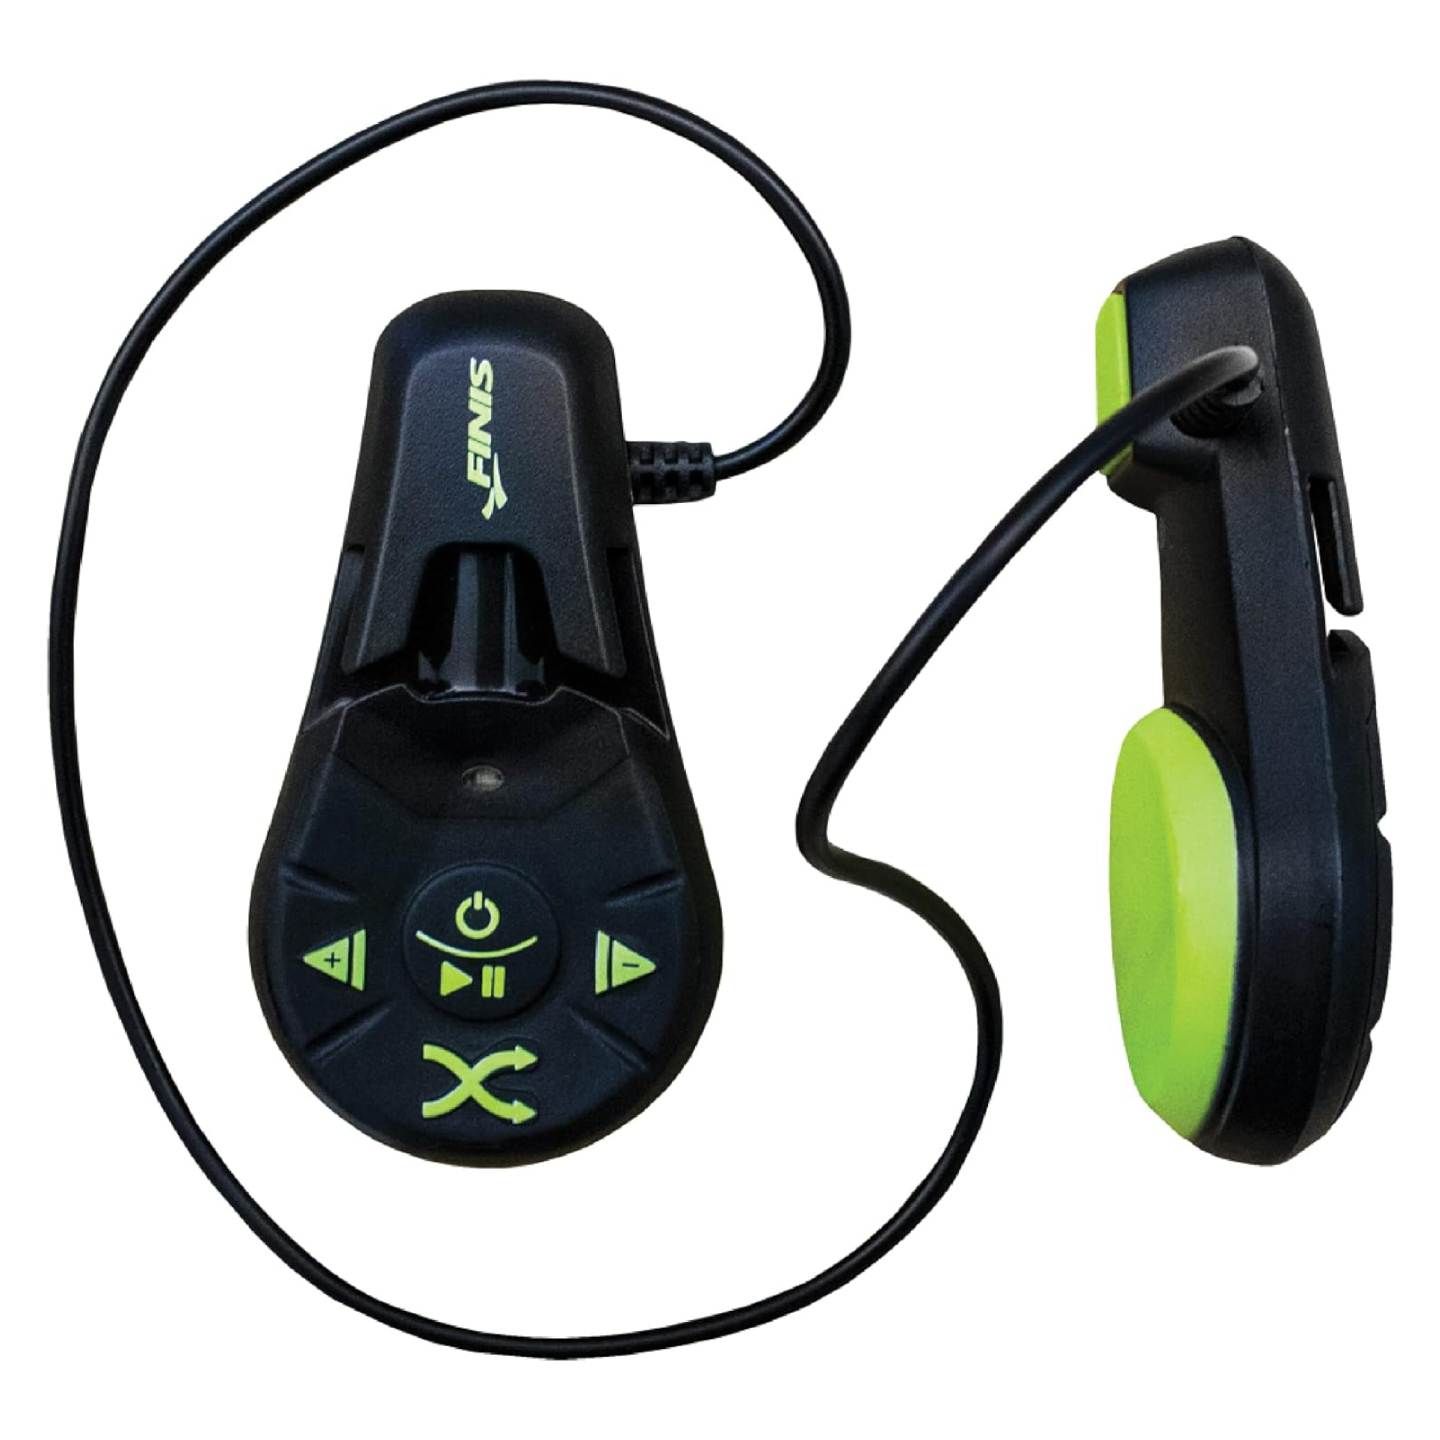 SWMIUSK IPx8 Waterproof Earbuds for Swimming, Perfect for